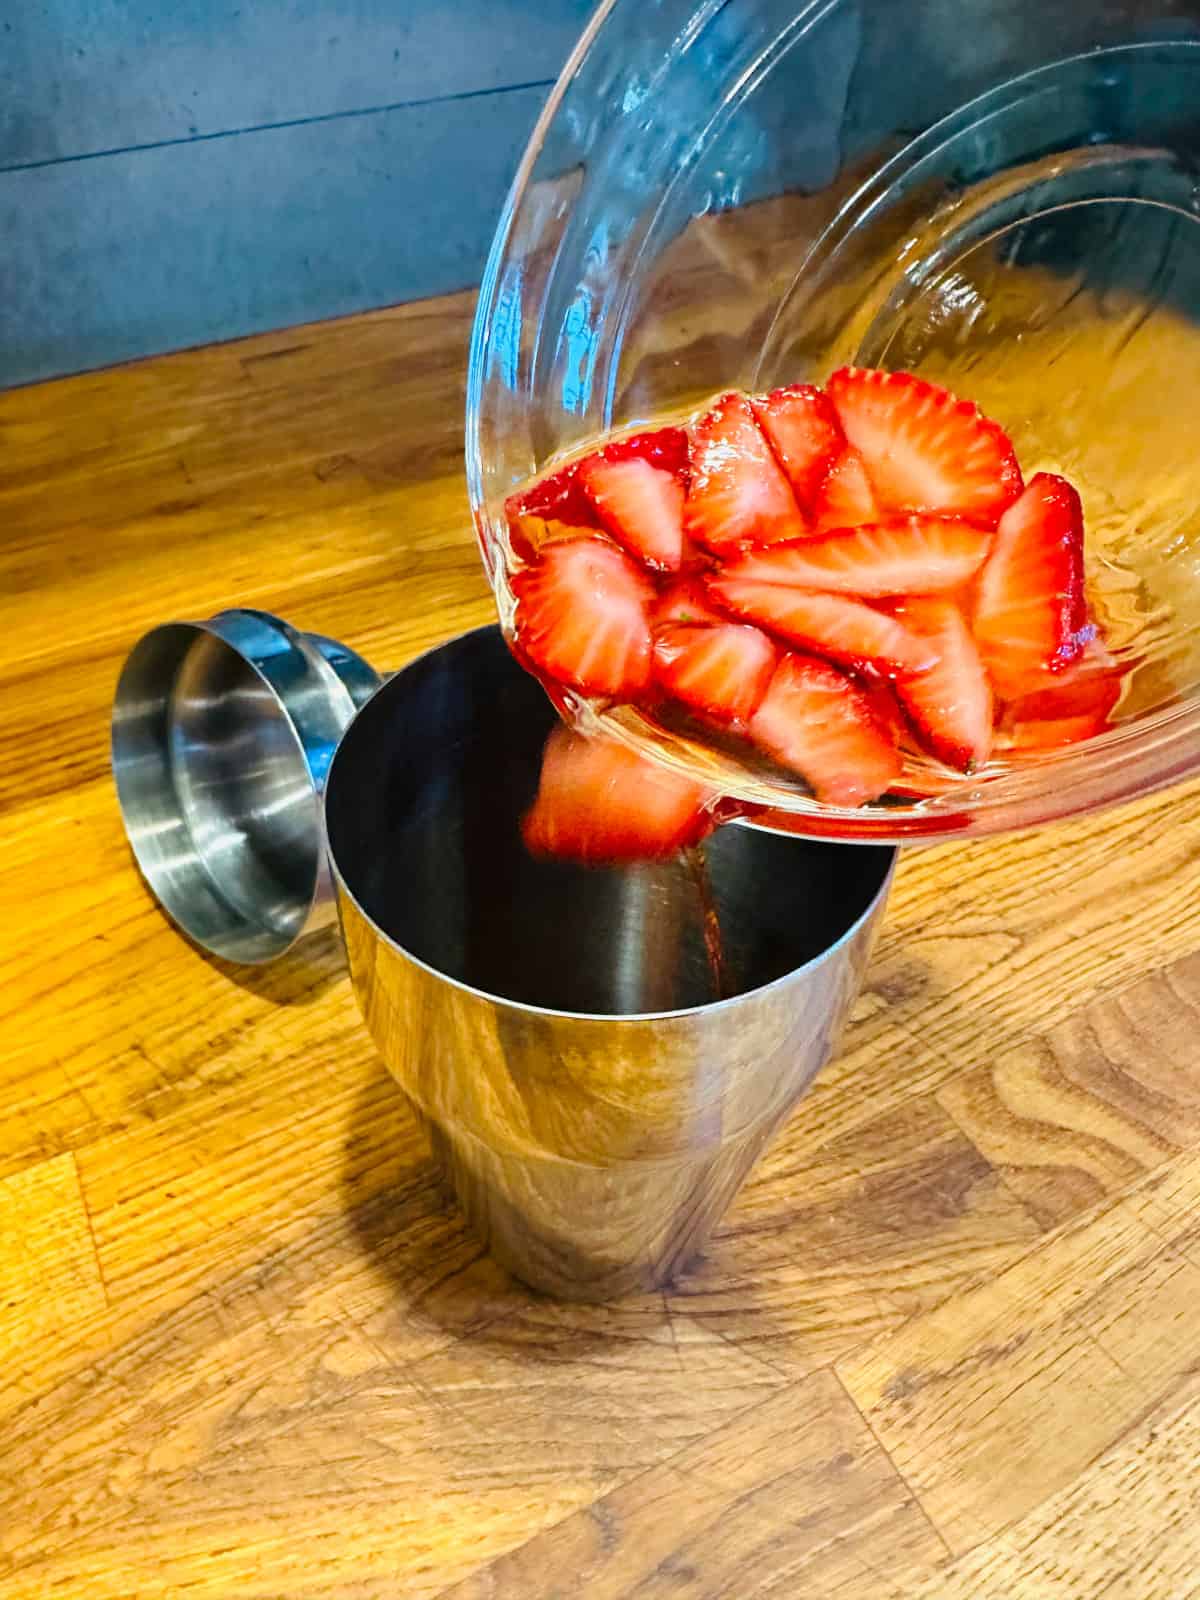 Sliced strawberries in pale liquid being poured from a glass bowl into a metal cocktail shaker.